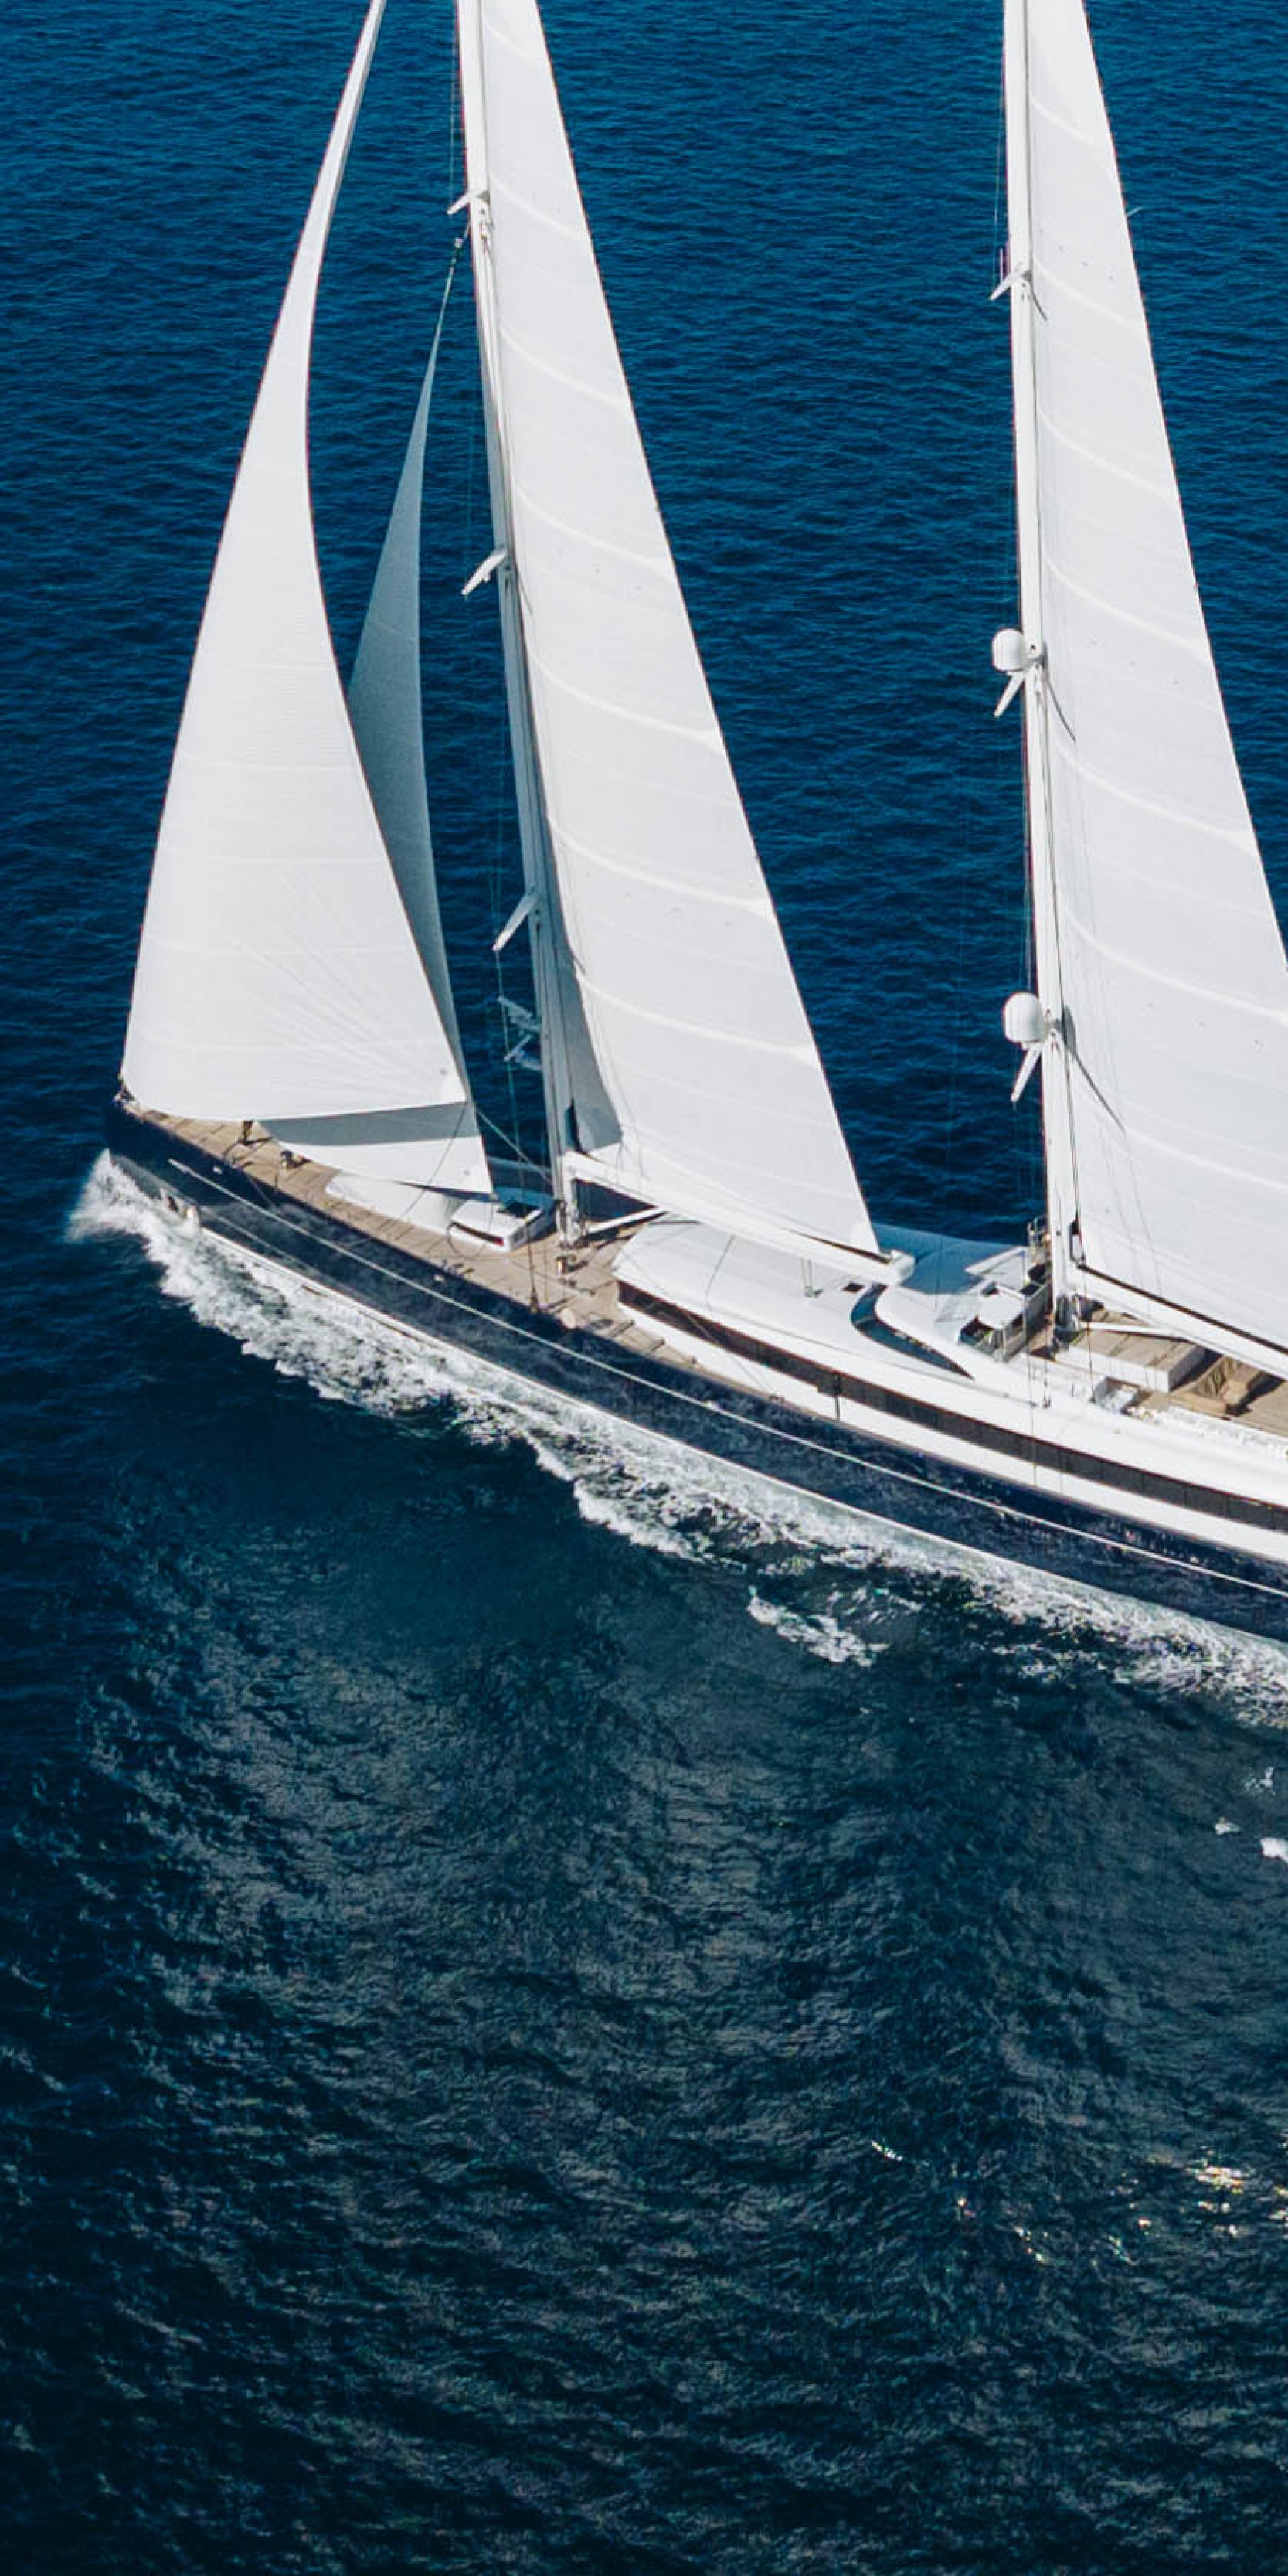 North Sails  Worldwide Leader in Sailmaking and Timeless Apparel